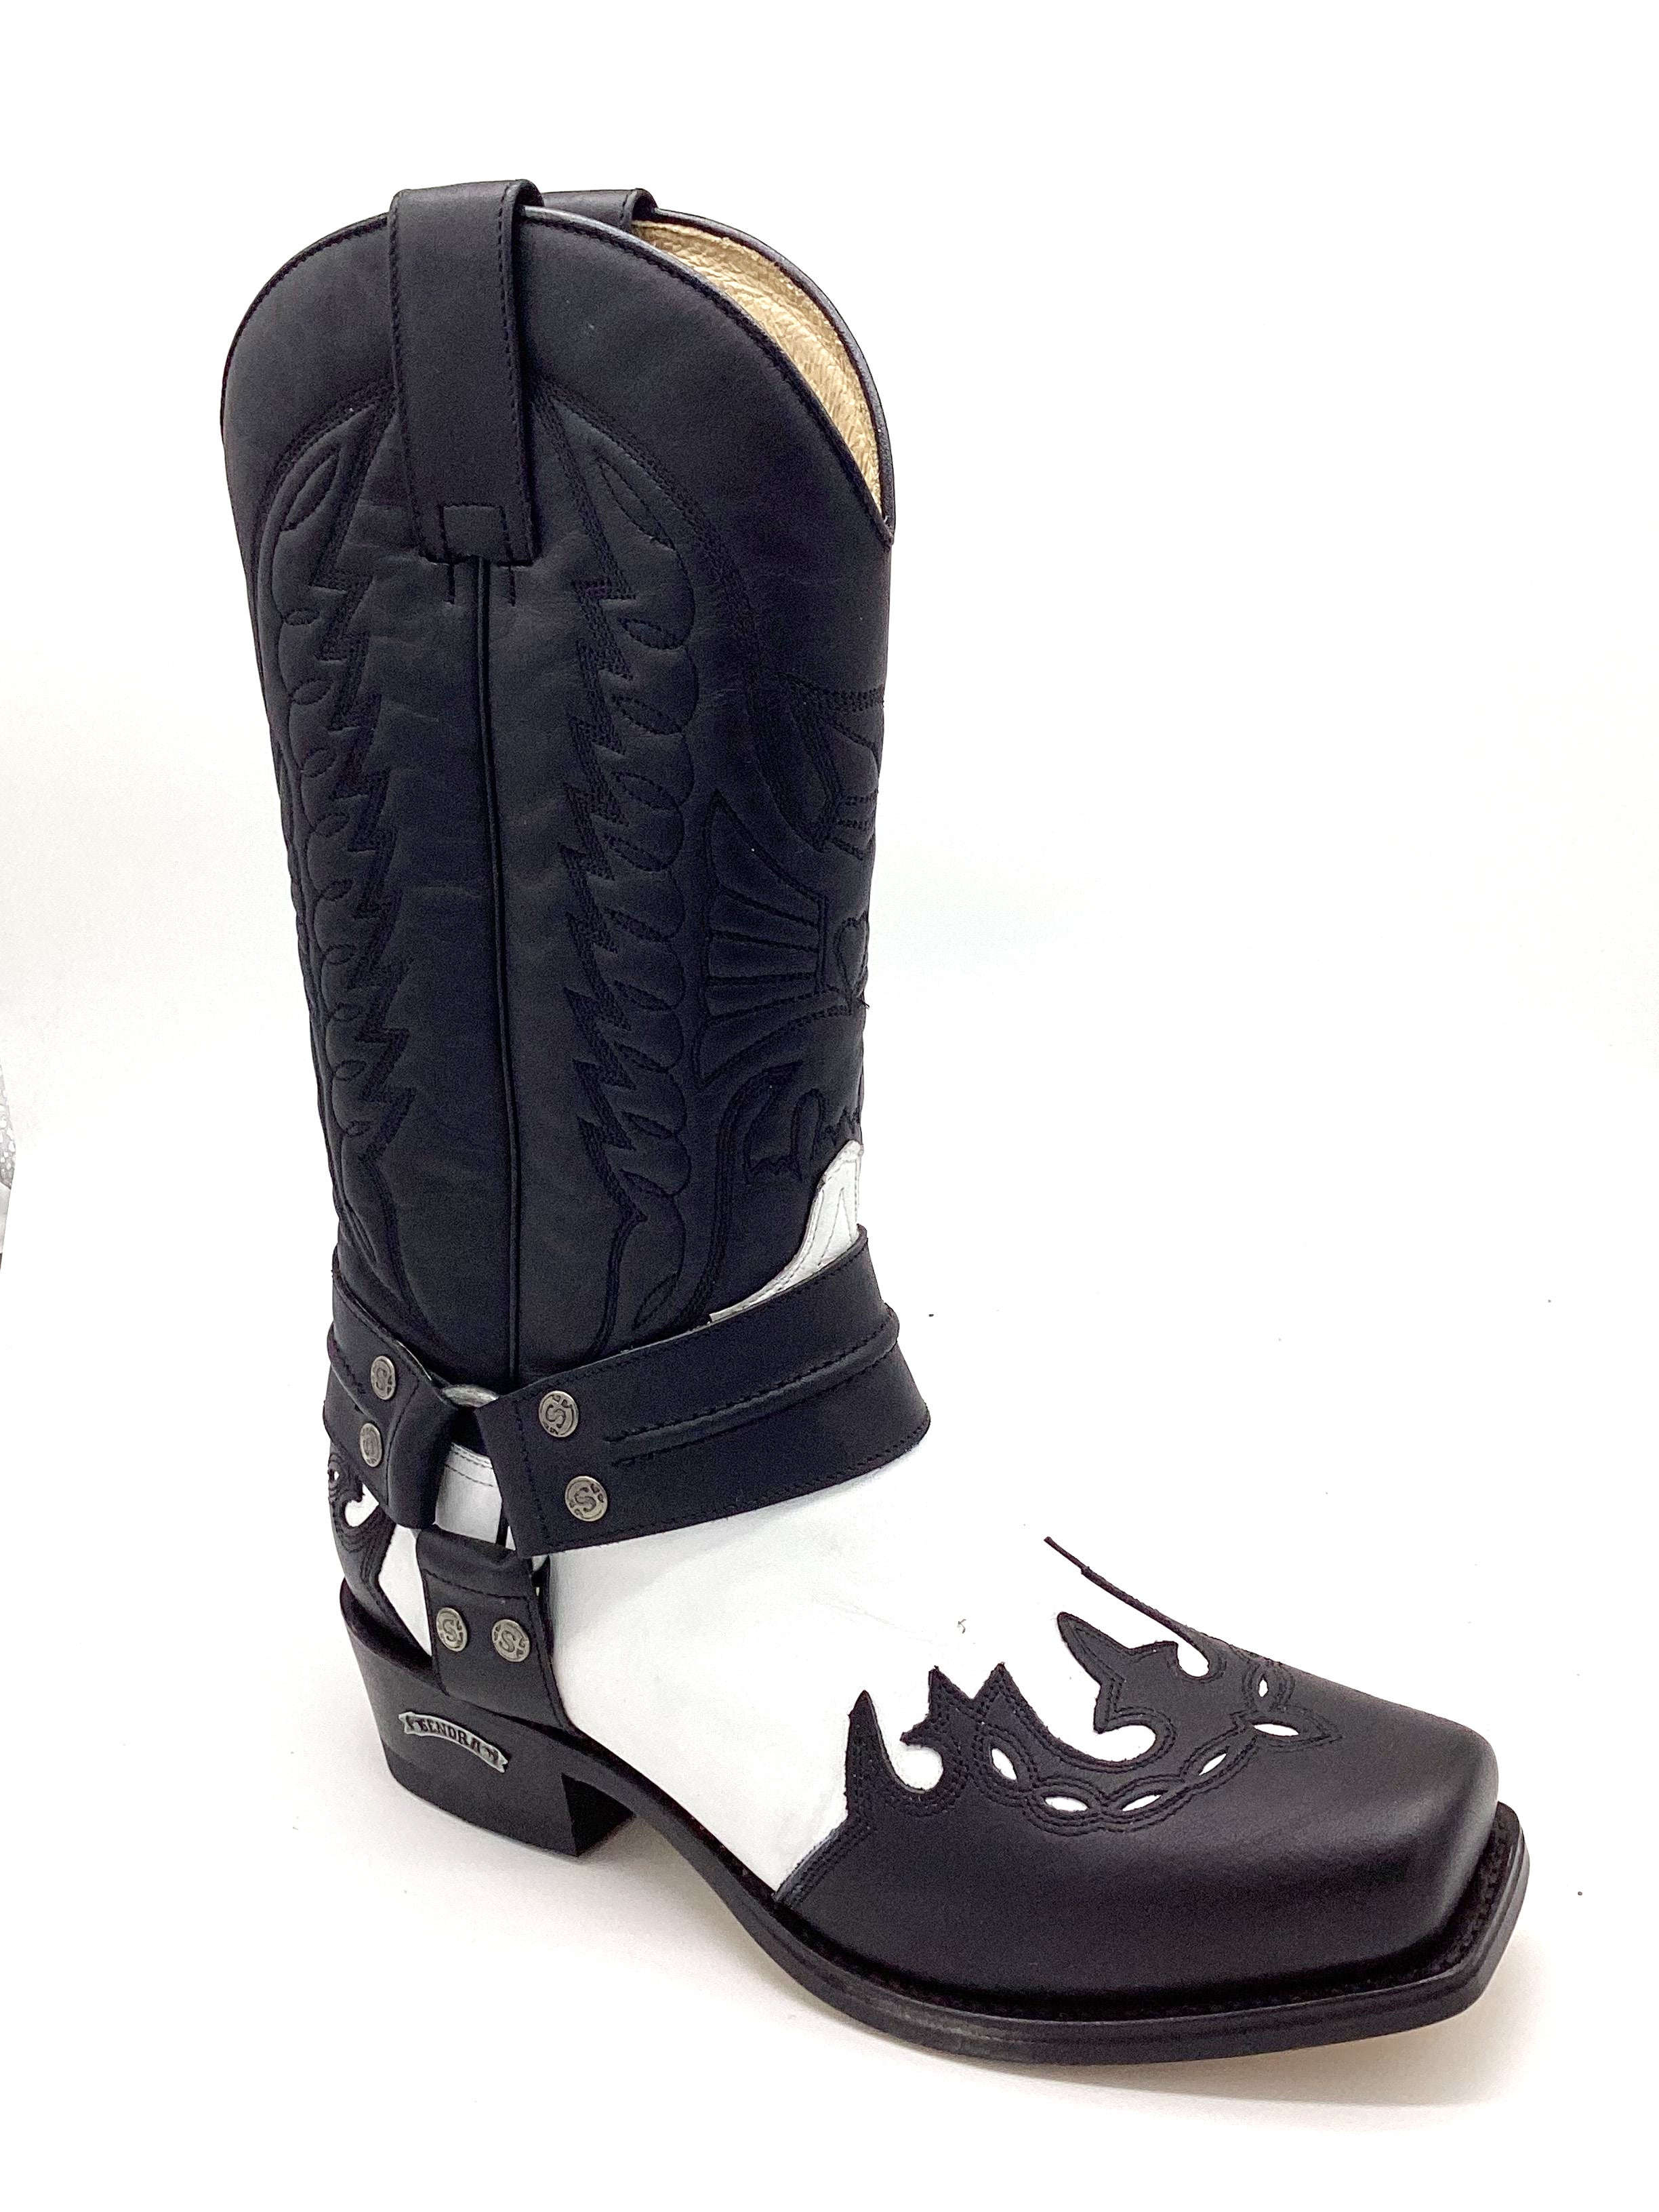 Sendra Boots Boots White/Black Real Leather Cowboy Biker Boots Exclusive & Limited